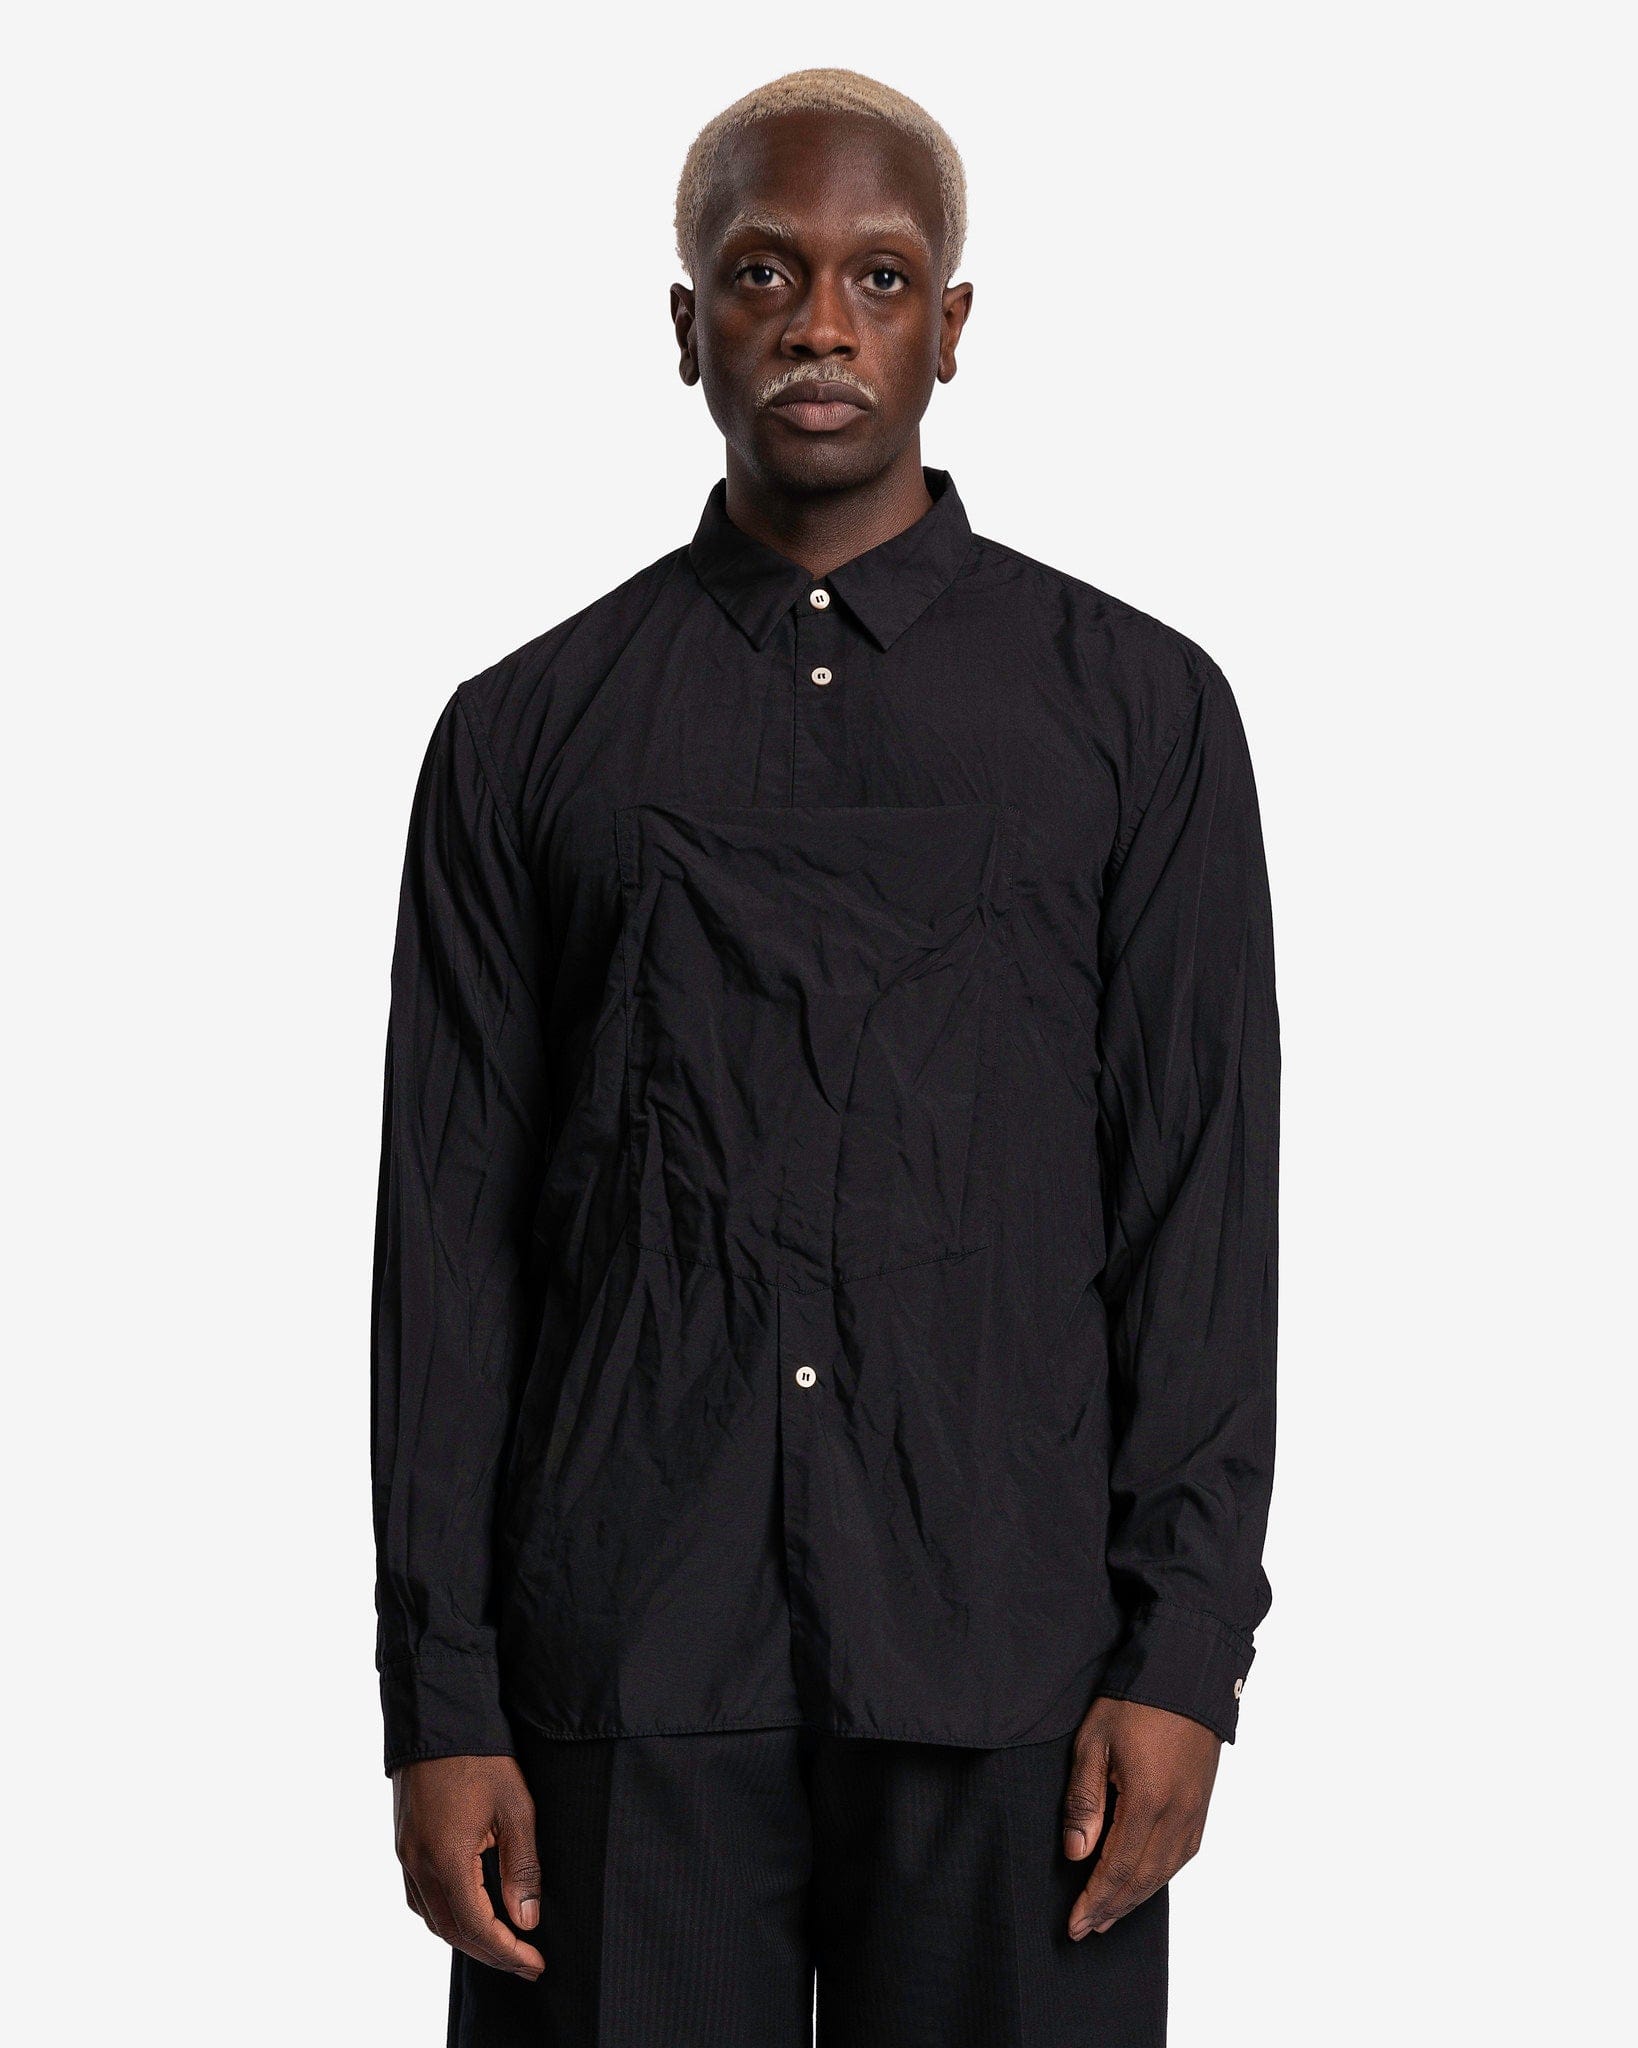 Single Pocket Button-Up Shirt in Black